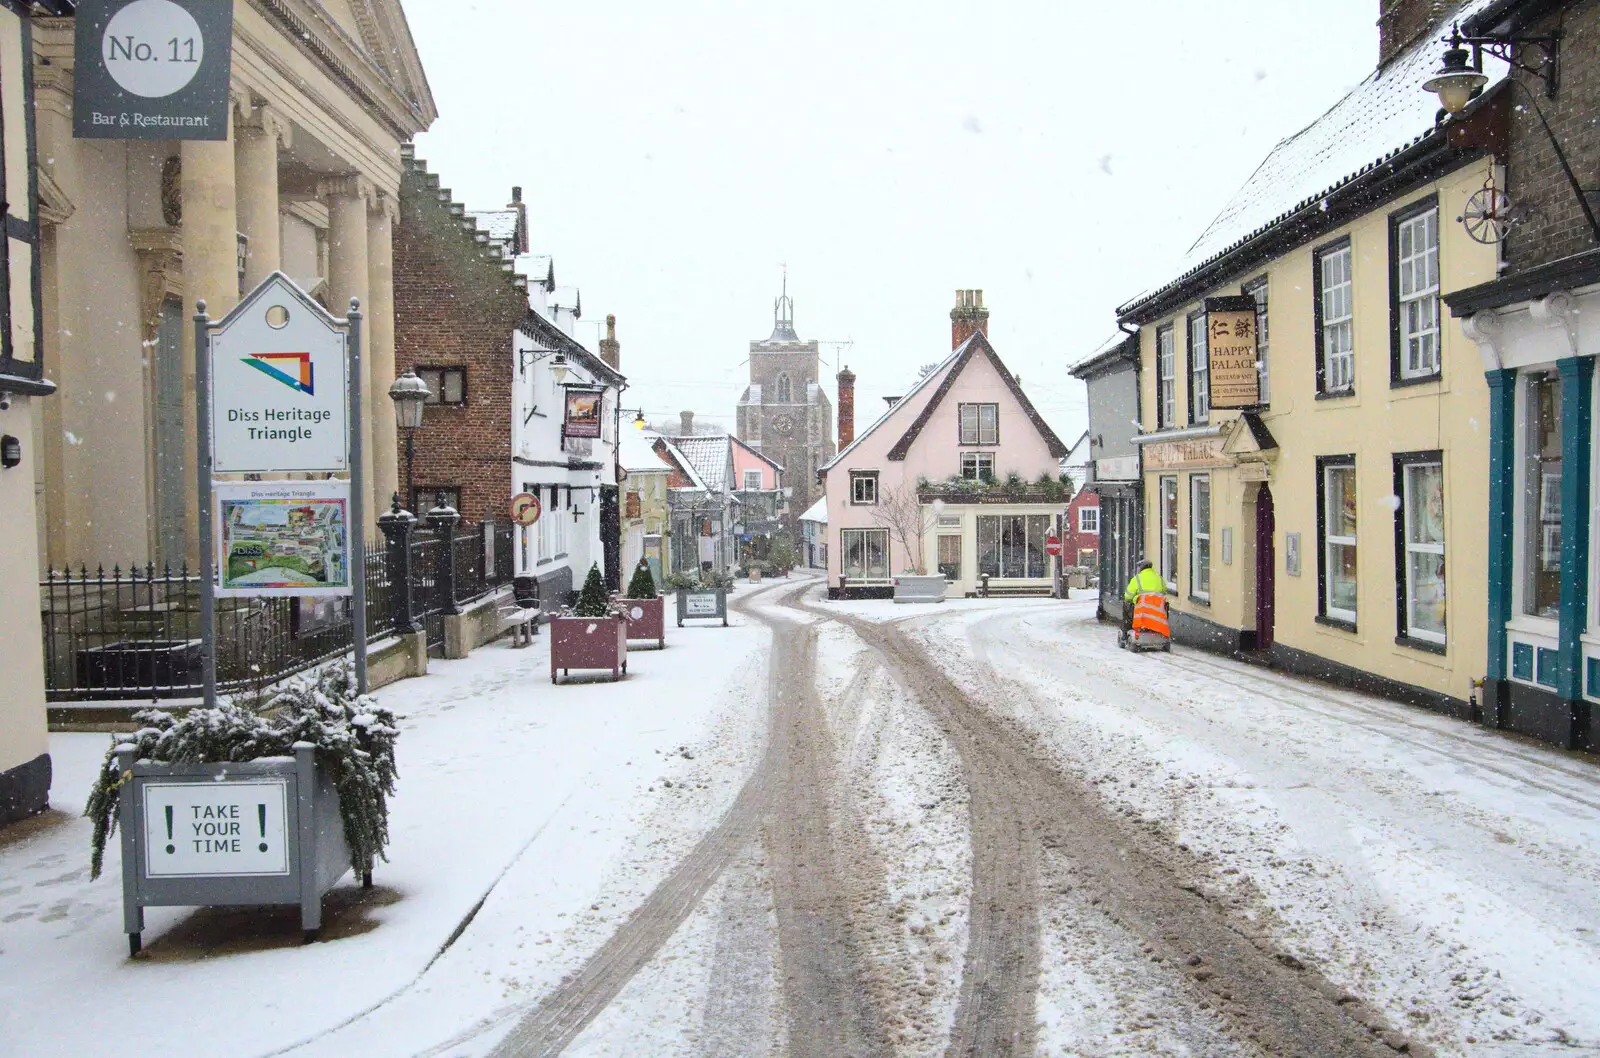 Diss Cornhall, from A Snowy Morning, Diss, Norfolk - 16th January 2021